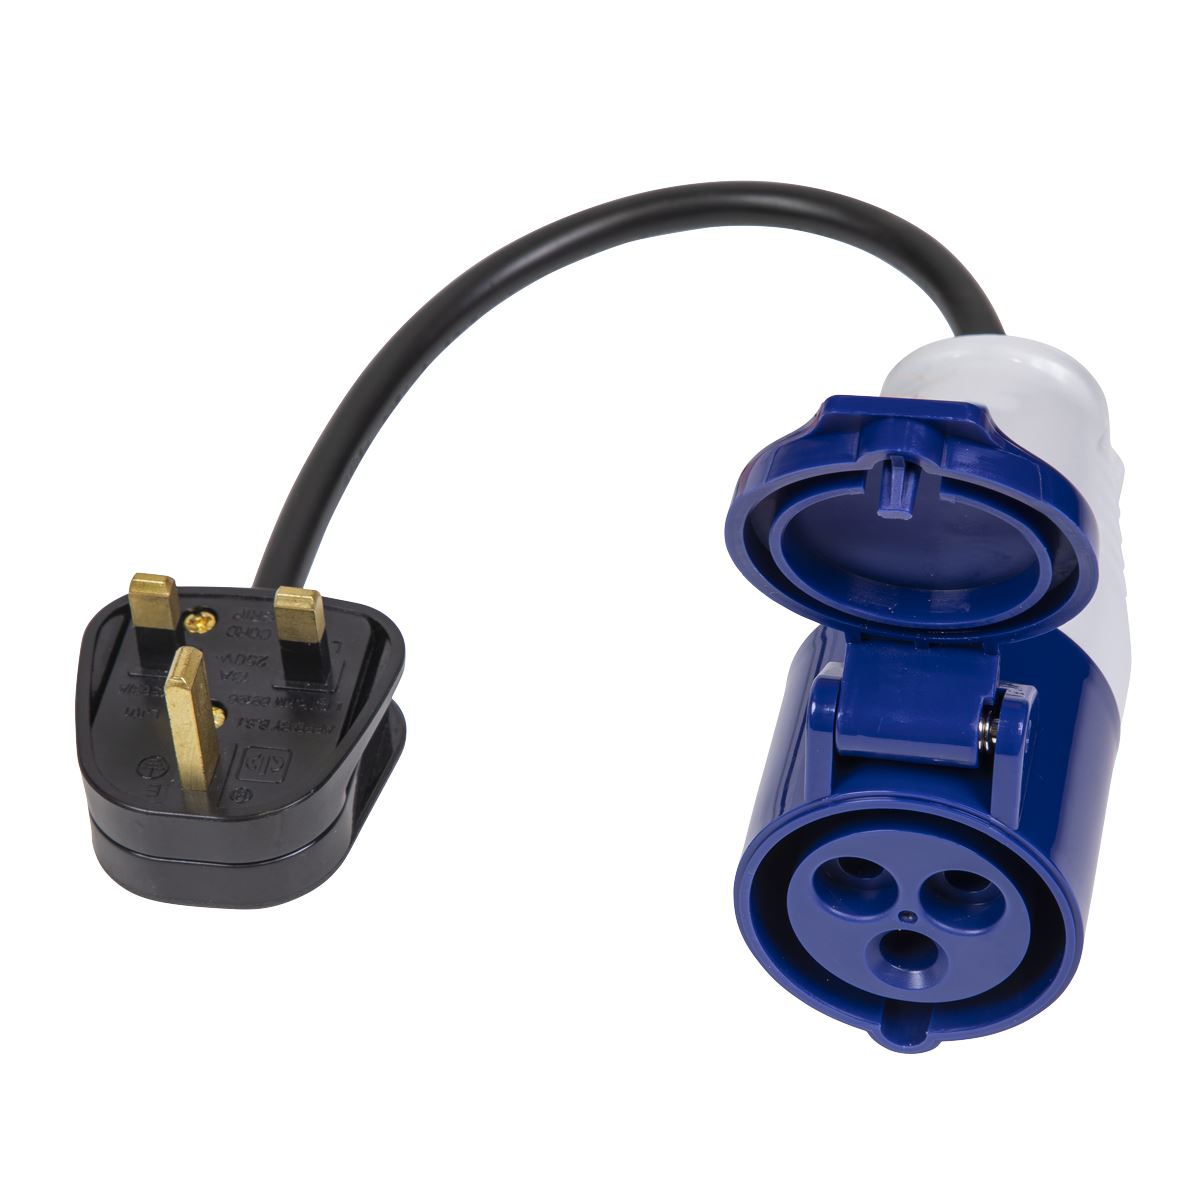 Worksafe by Sealey 13A/16A Trailing Socket & Cable Set